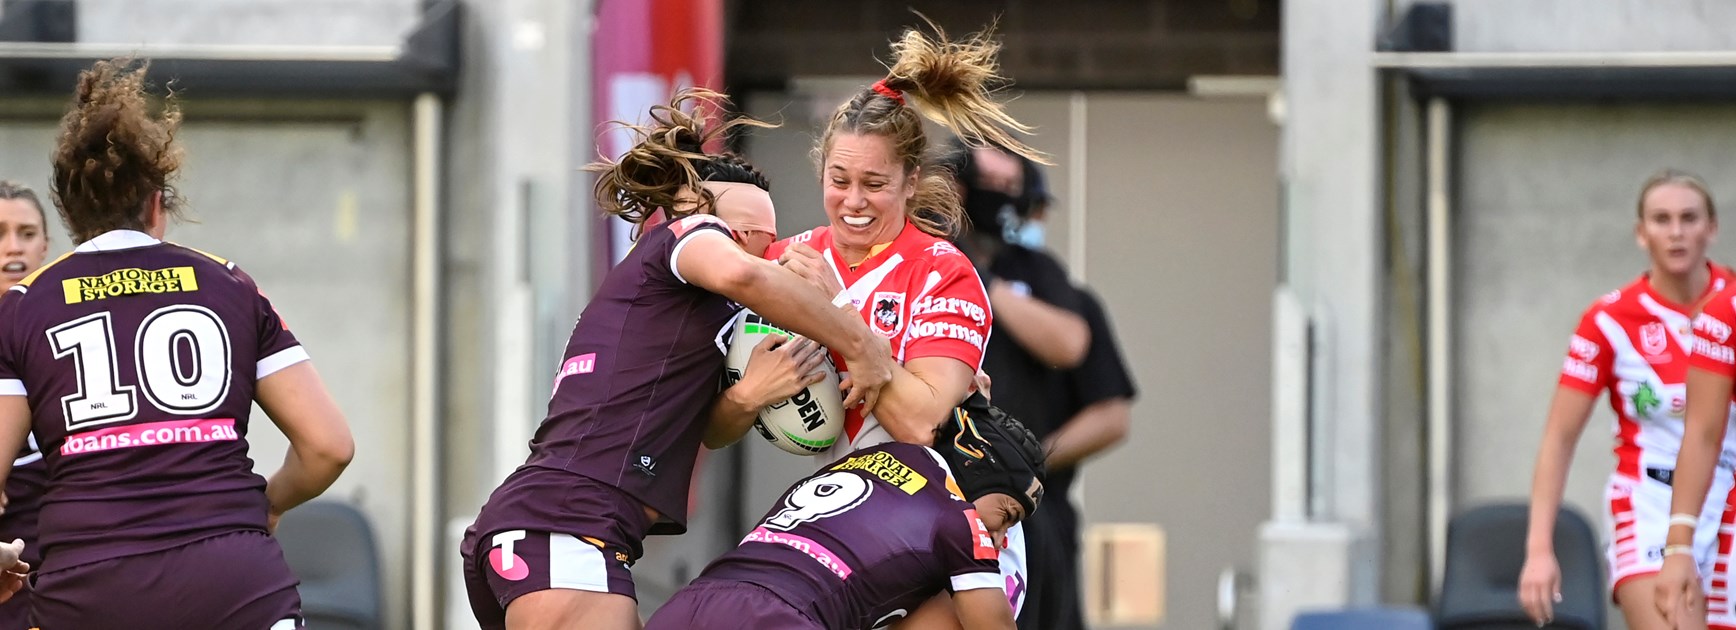 NRLW now a standalone October event after kick-off delay